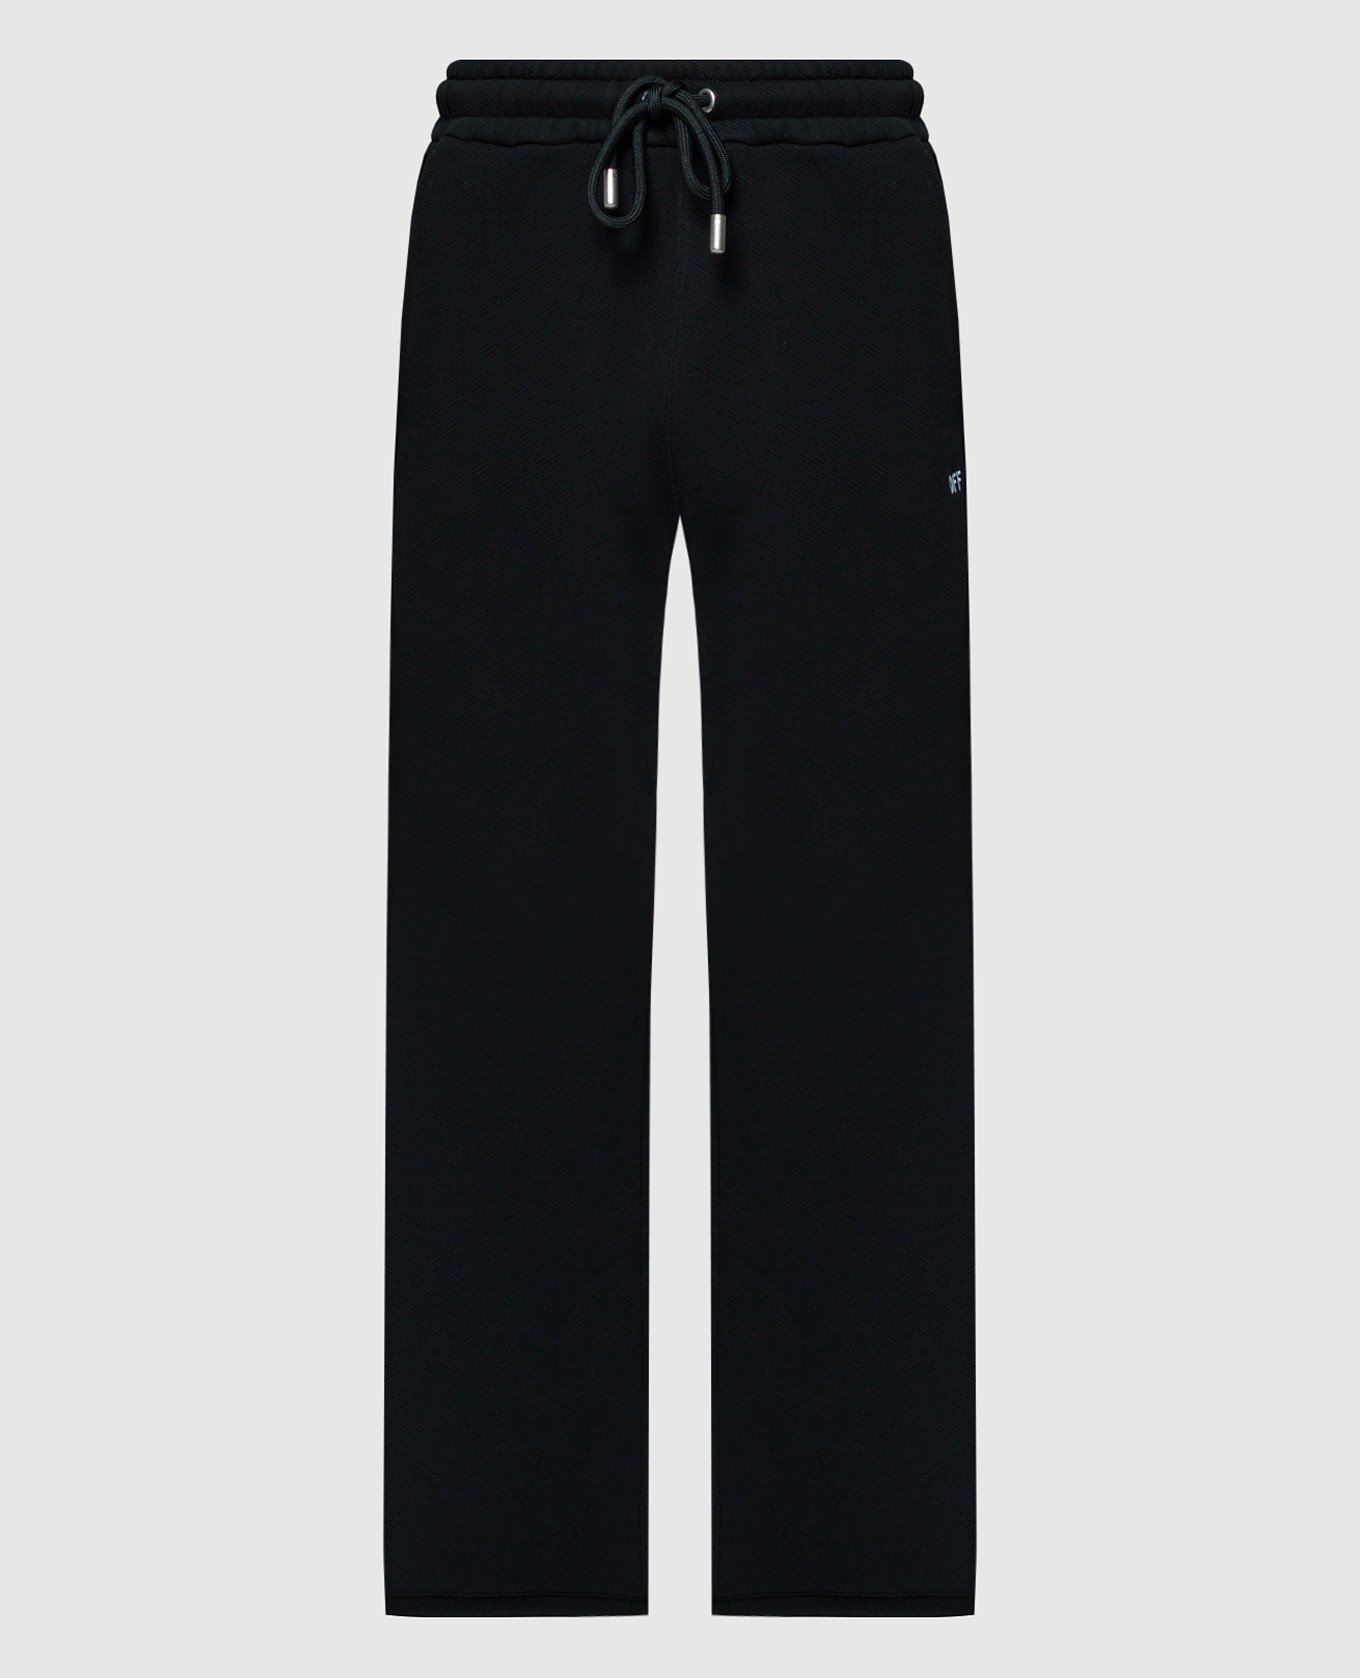 Black sweatpants with Off embroidery